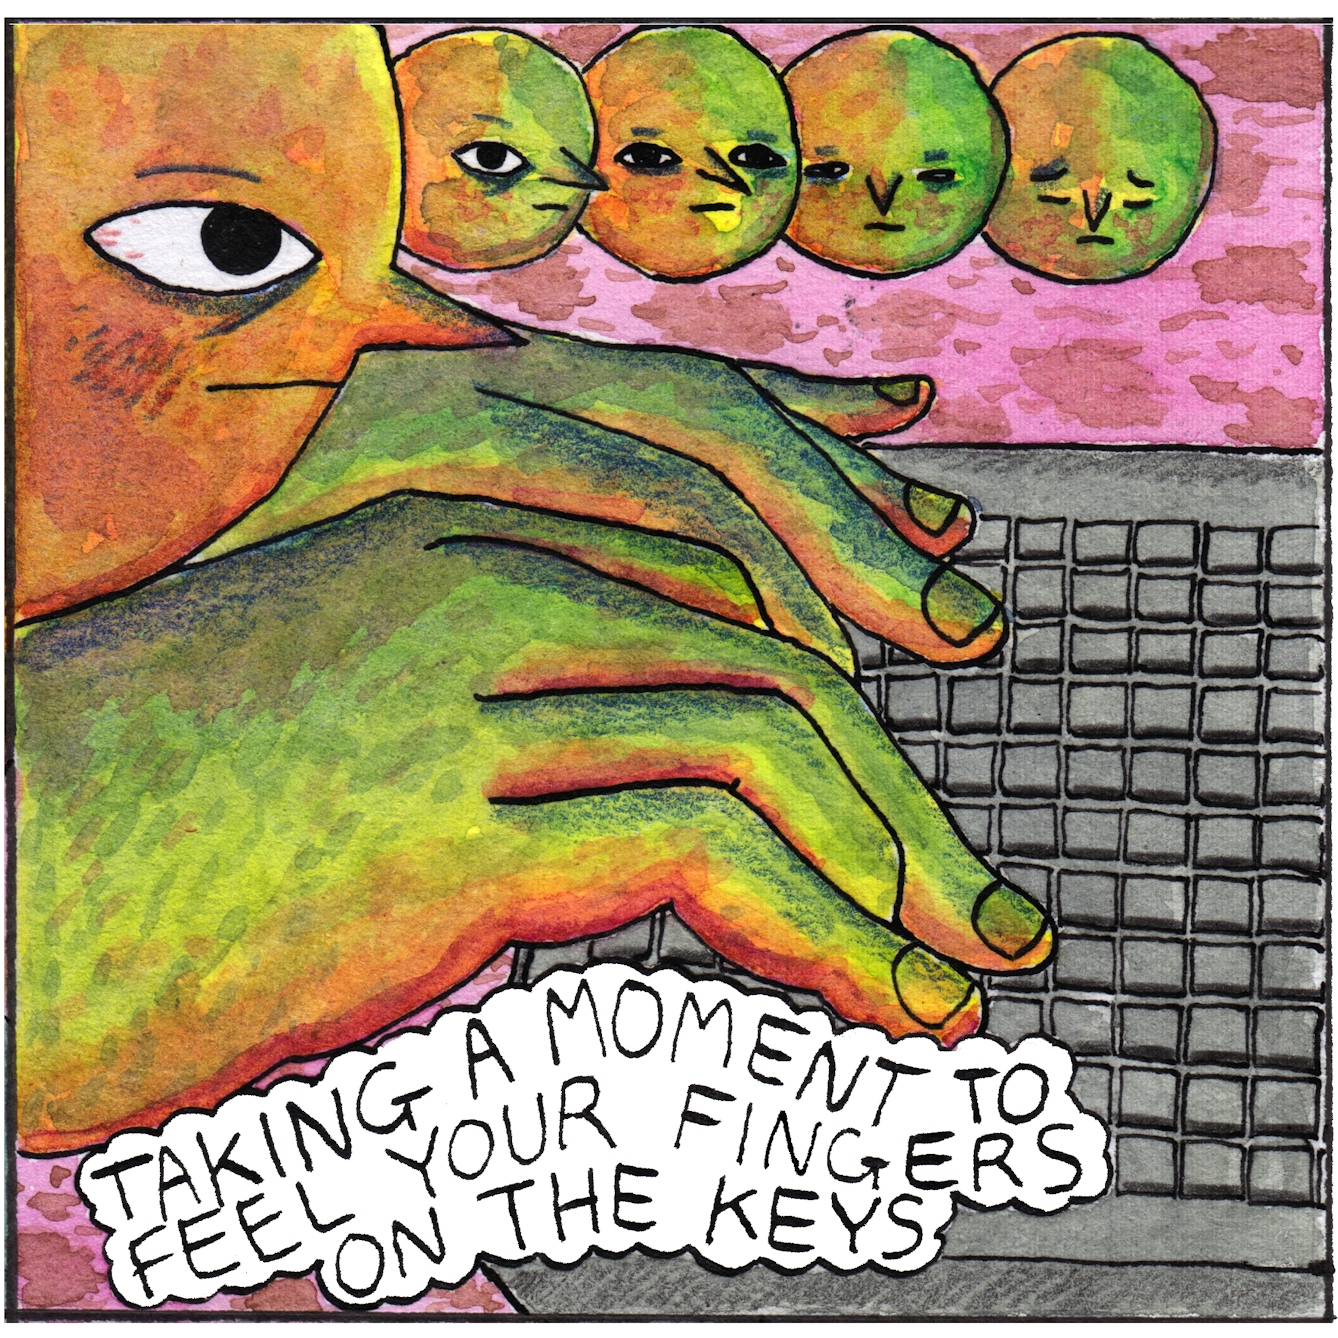 In panel two of 'Doing emails' webcomic, the same face appears in the top left of the frame with a determined expression. Most of the panel is filled by the character's disproportionately large hands resting on an equally large keyboard. Four small round faces with gradually changing expressions float along the top of the panel in a line. The final face has closed eyes and a sad, tired expression. A bubble of text under the large hands says: "Taking a moment to feel your fingers on the keyboard"